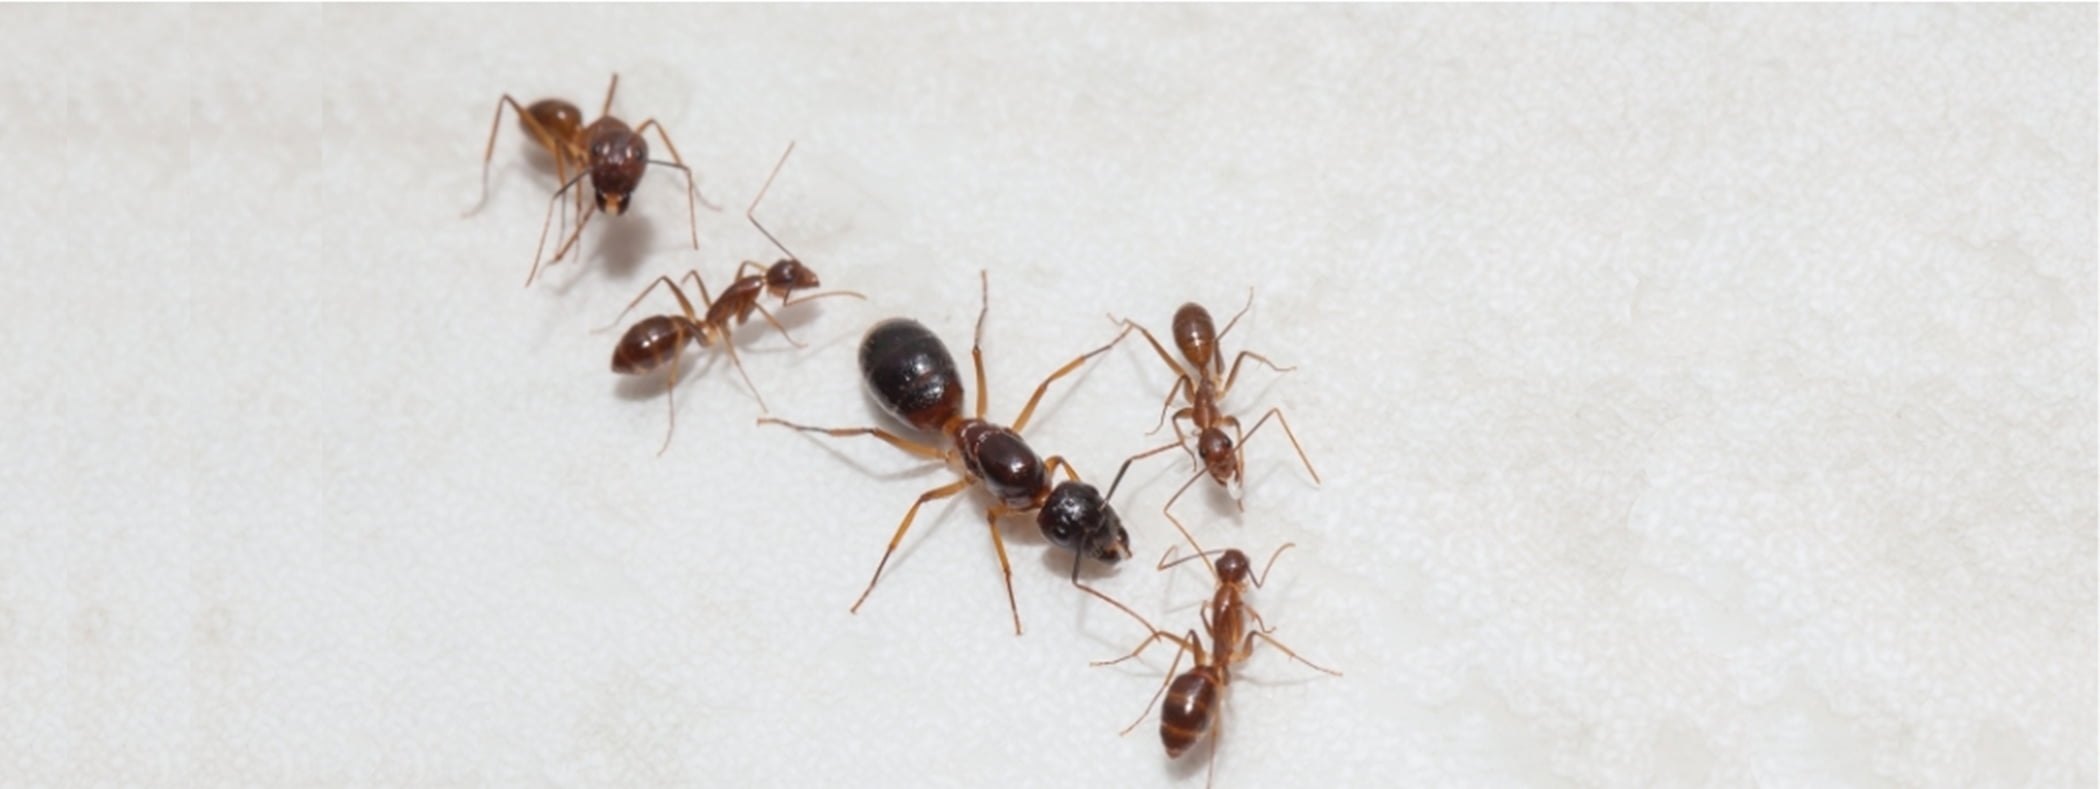 What to Do If You Find an Ant Queen